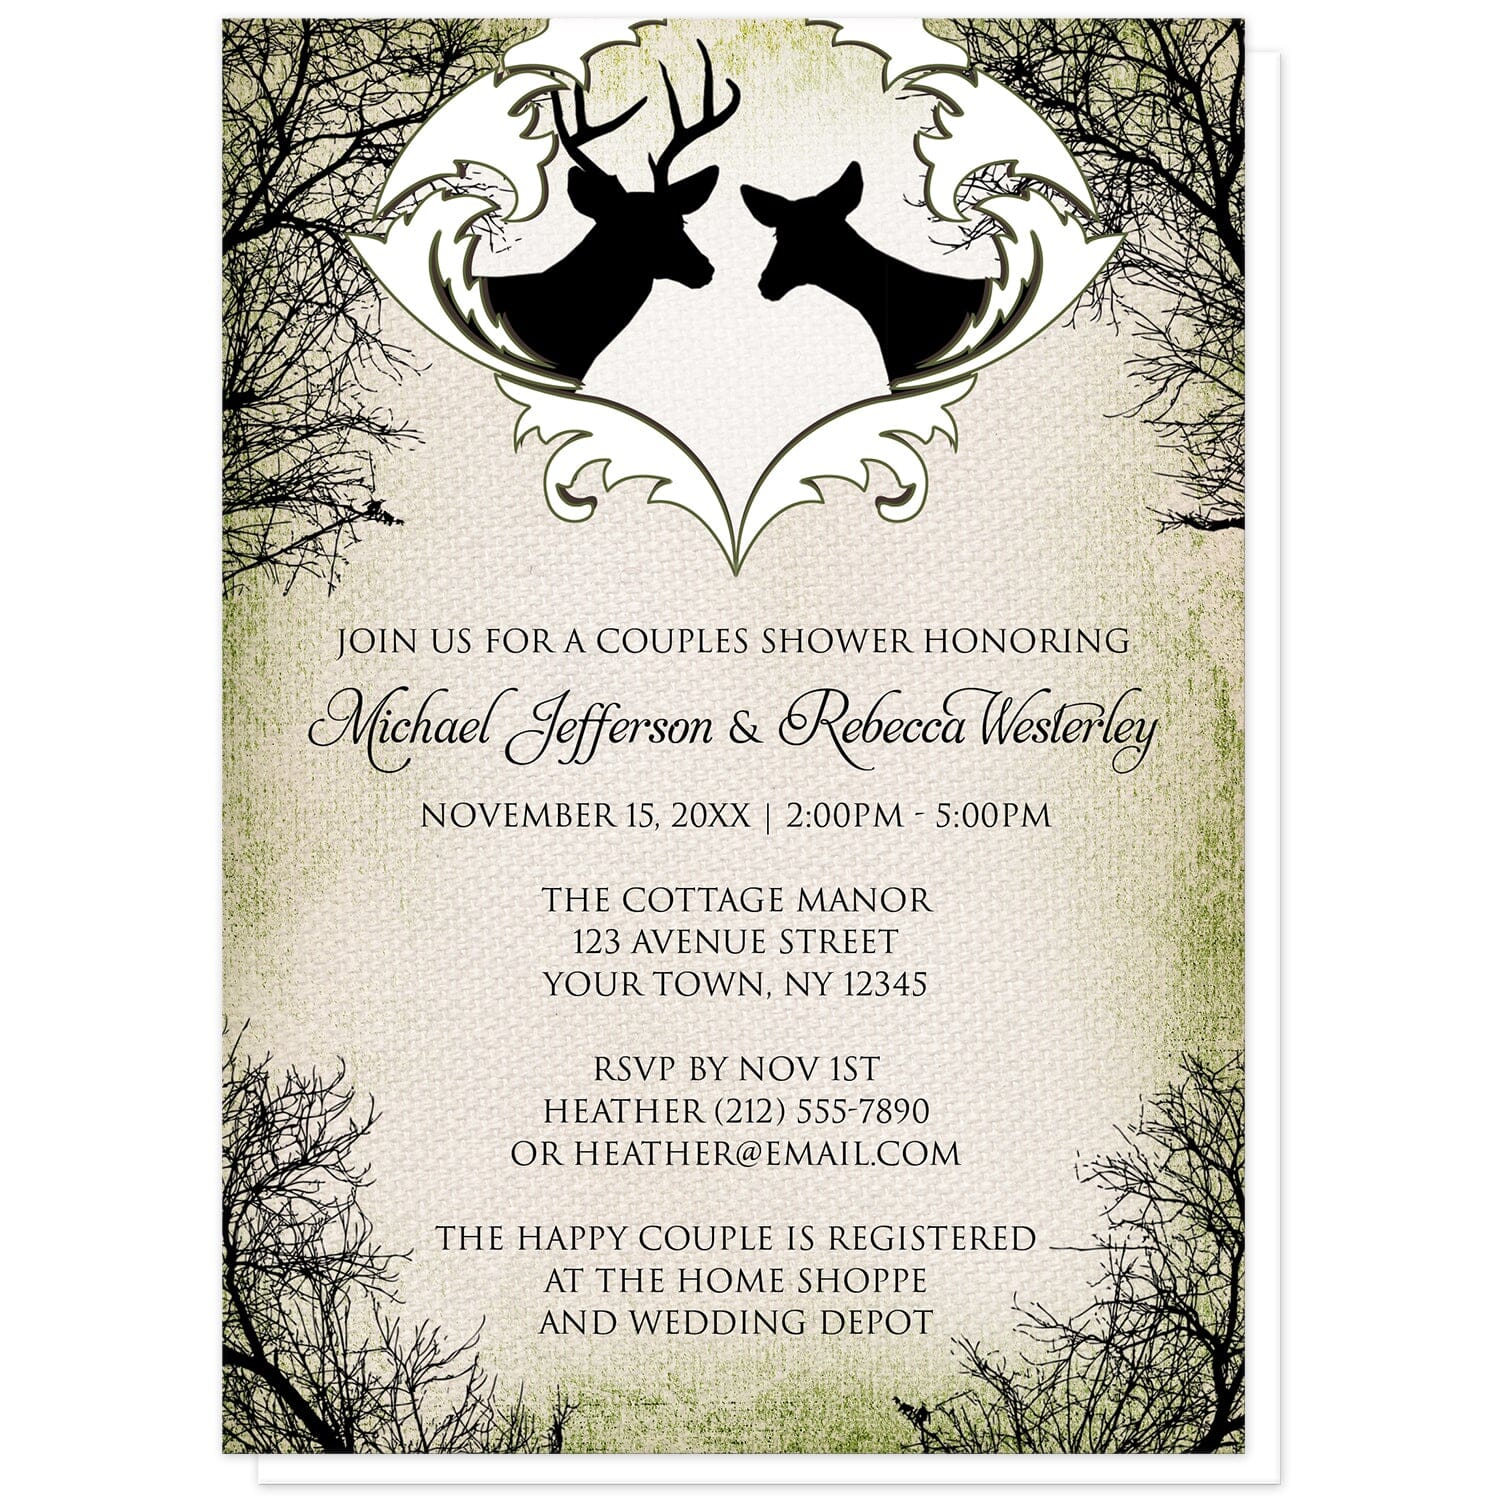 Rustic Deer Frame Canvas Couples Shower Invitations at Artistically Invited. Rustic deer frame canvas couples shower invitations designed with black silhouettes of a buck with antlers and a doe in a white frame design at the top, over a rustic brown and green canvas design bordered with winter tree silhouettes. Your personalized couple shower celebration details are custom printed in black below the deer over the canvas background design.